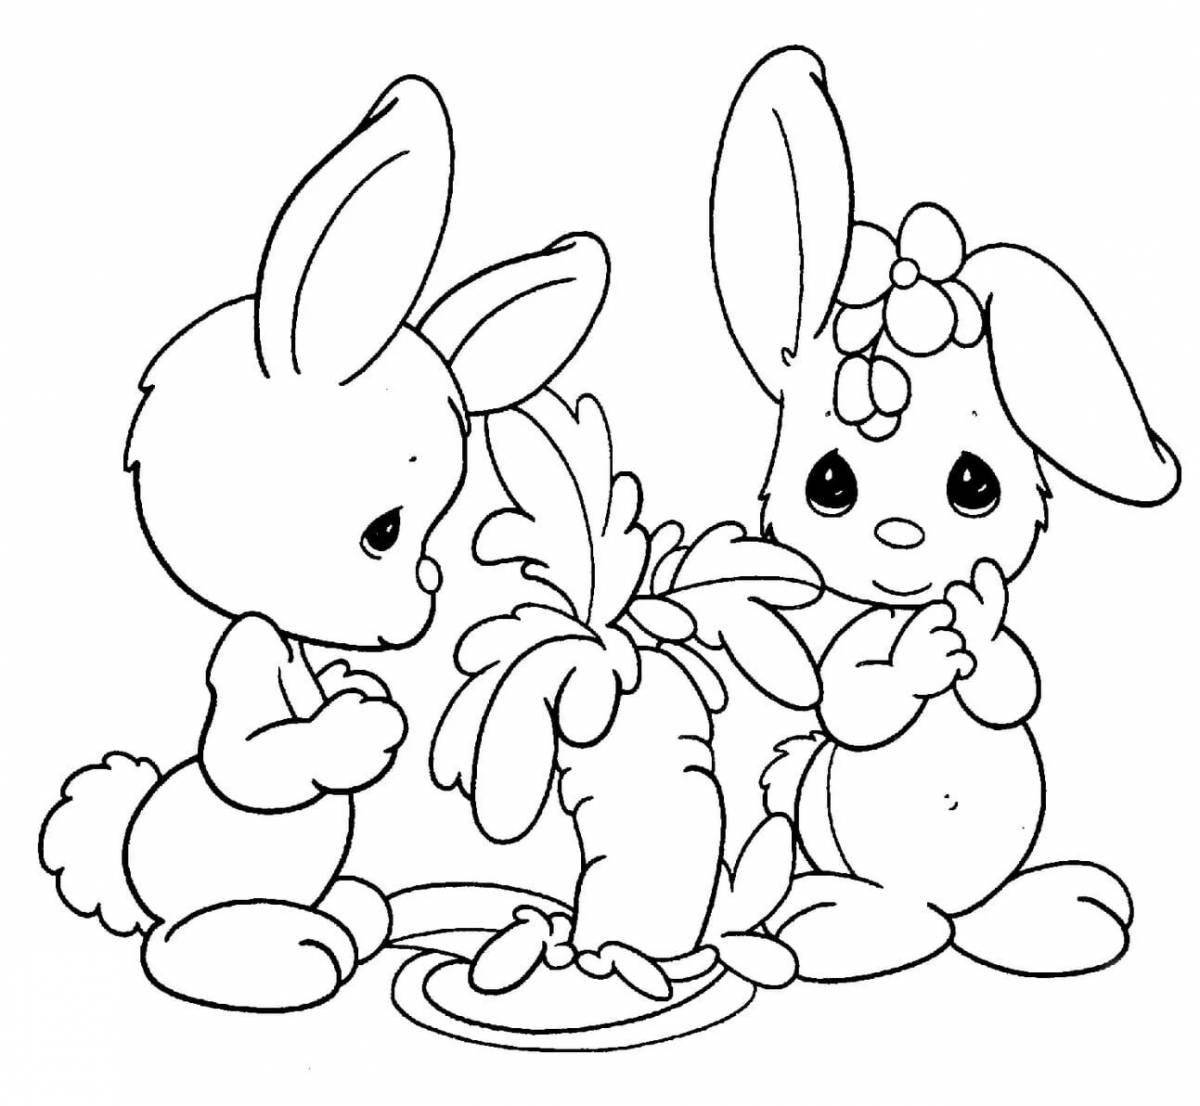 Coloring cute hare for kids